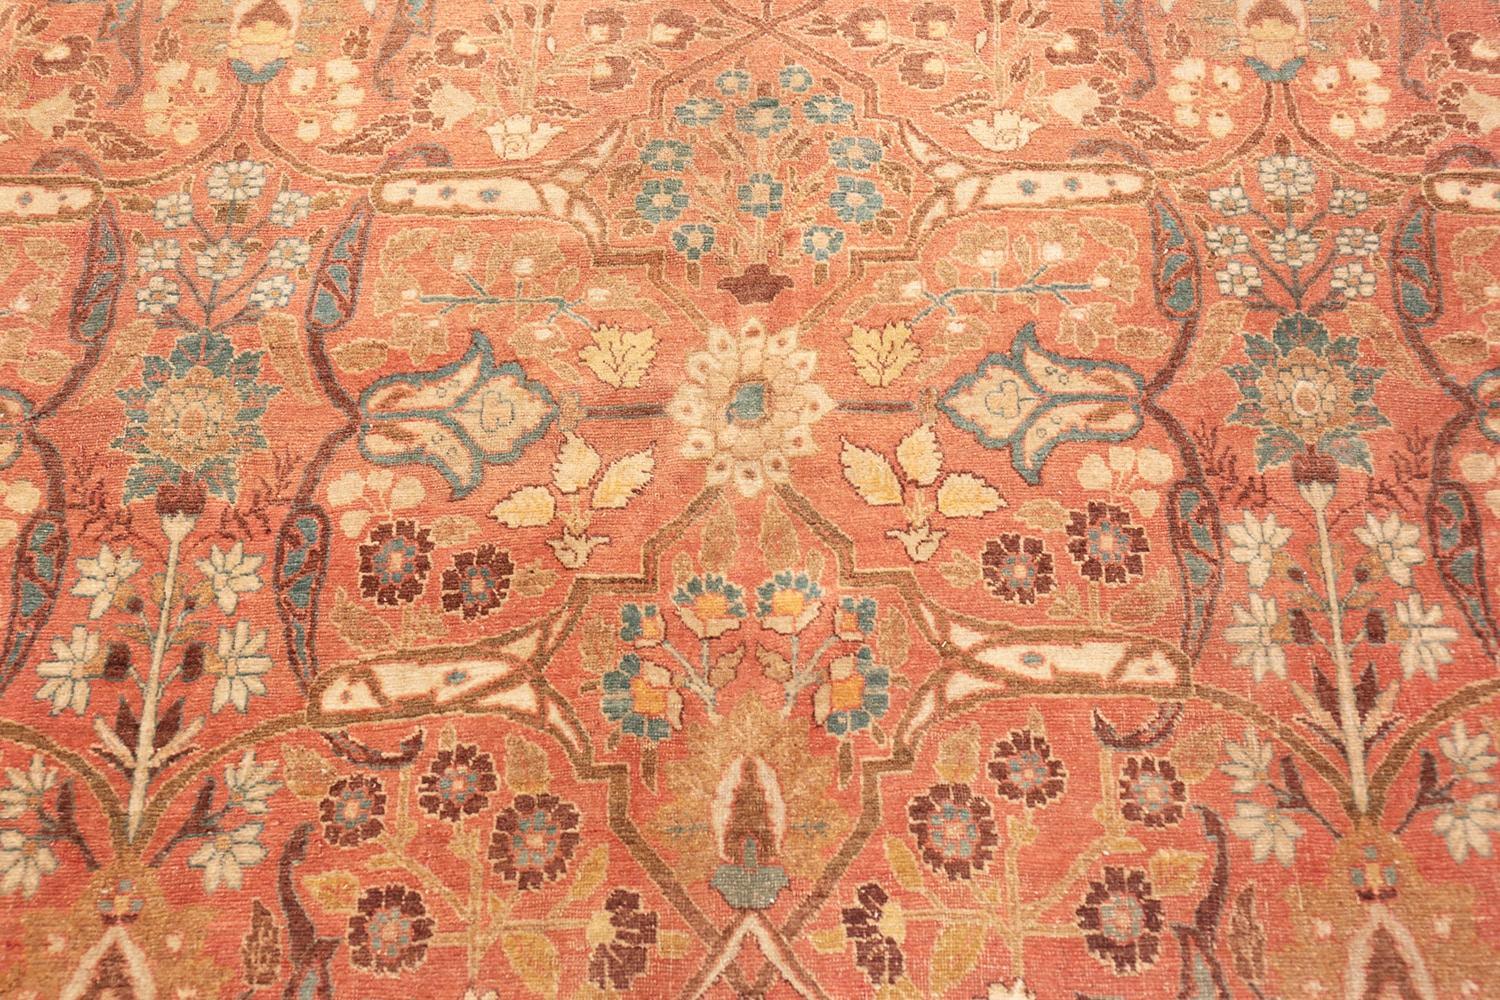 Antique Persian Tabriz rug, Country of Origin: Persia, Circa date: 1900. Size: 7 ft 6 in x 11 ft 3 in (2.29 m x 3.43 m)

